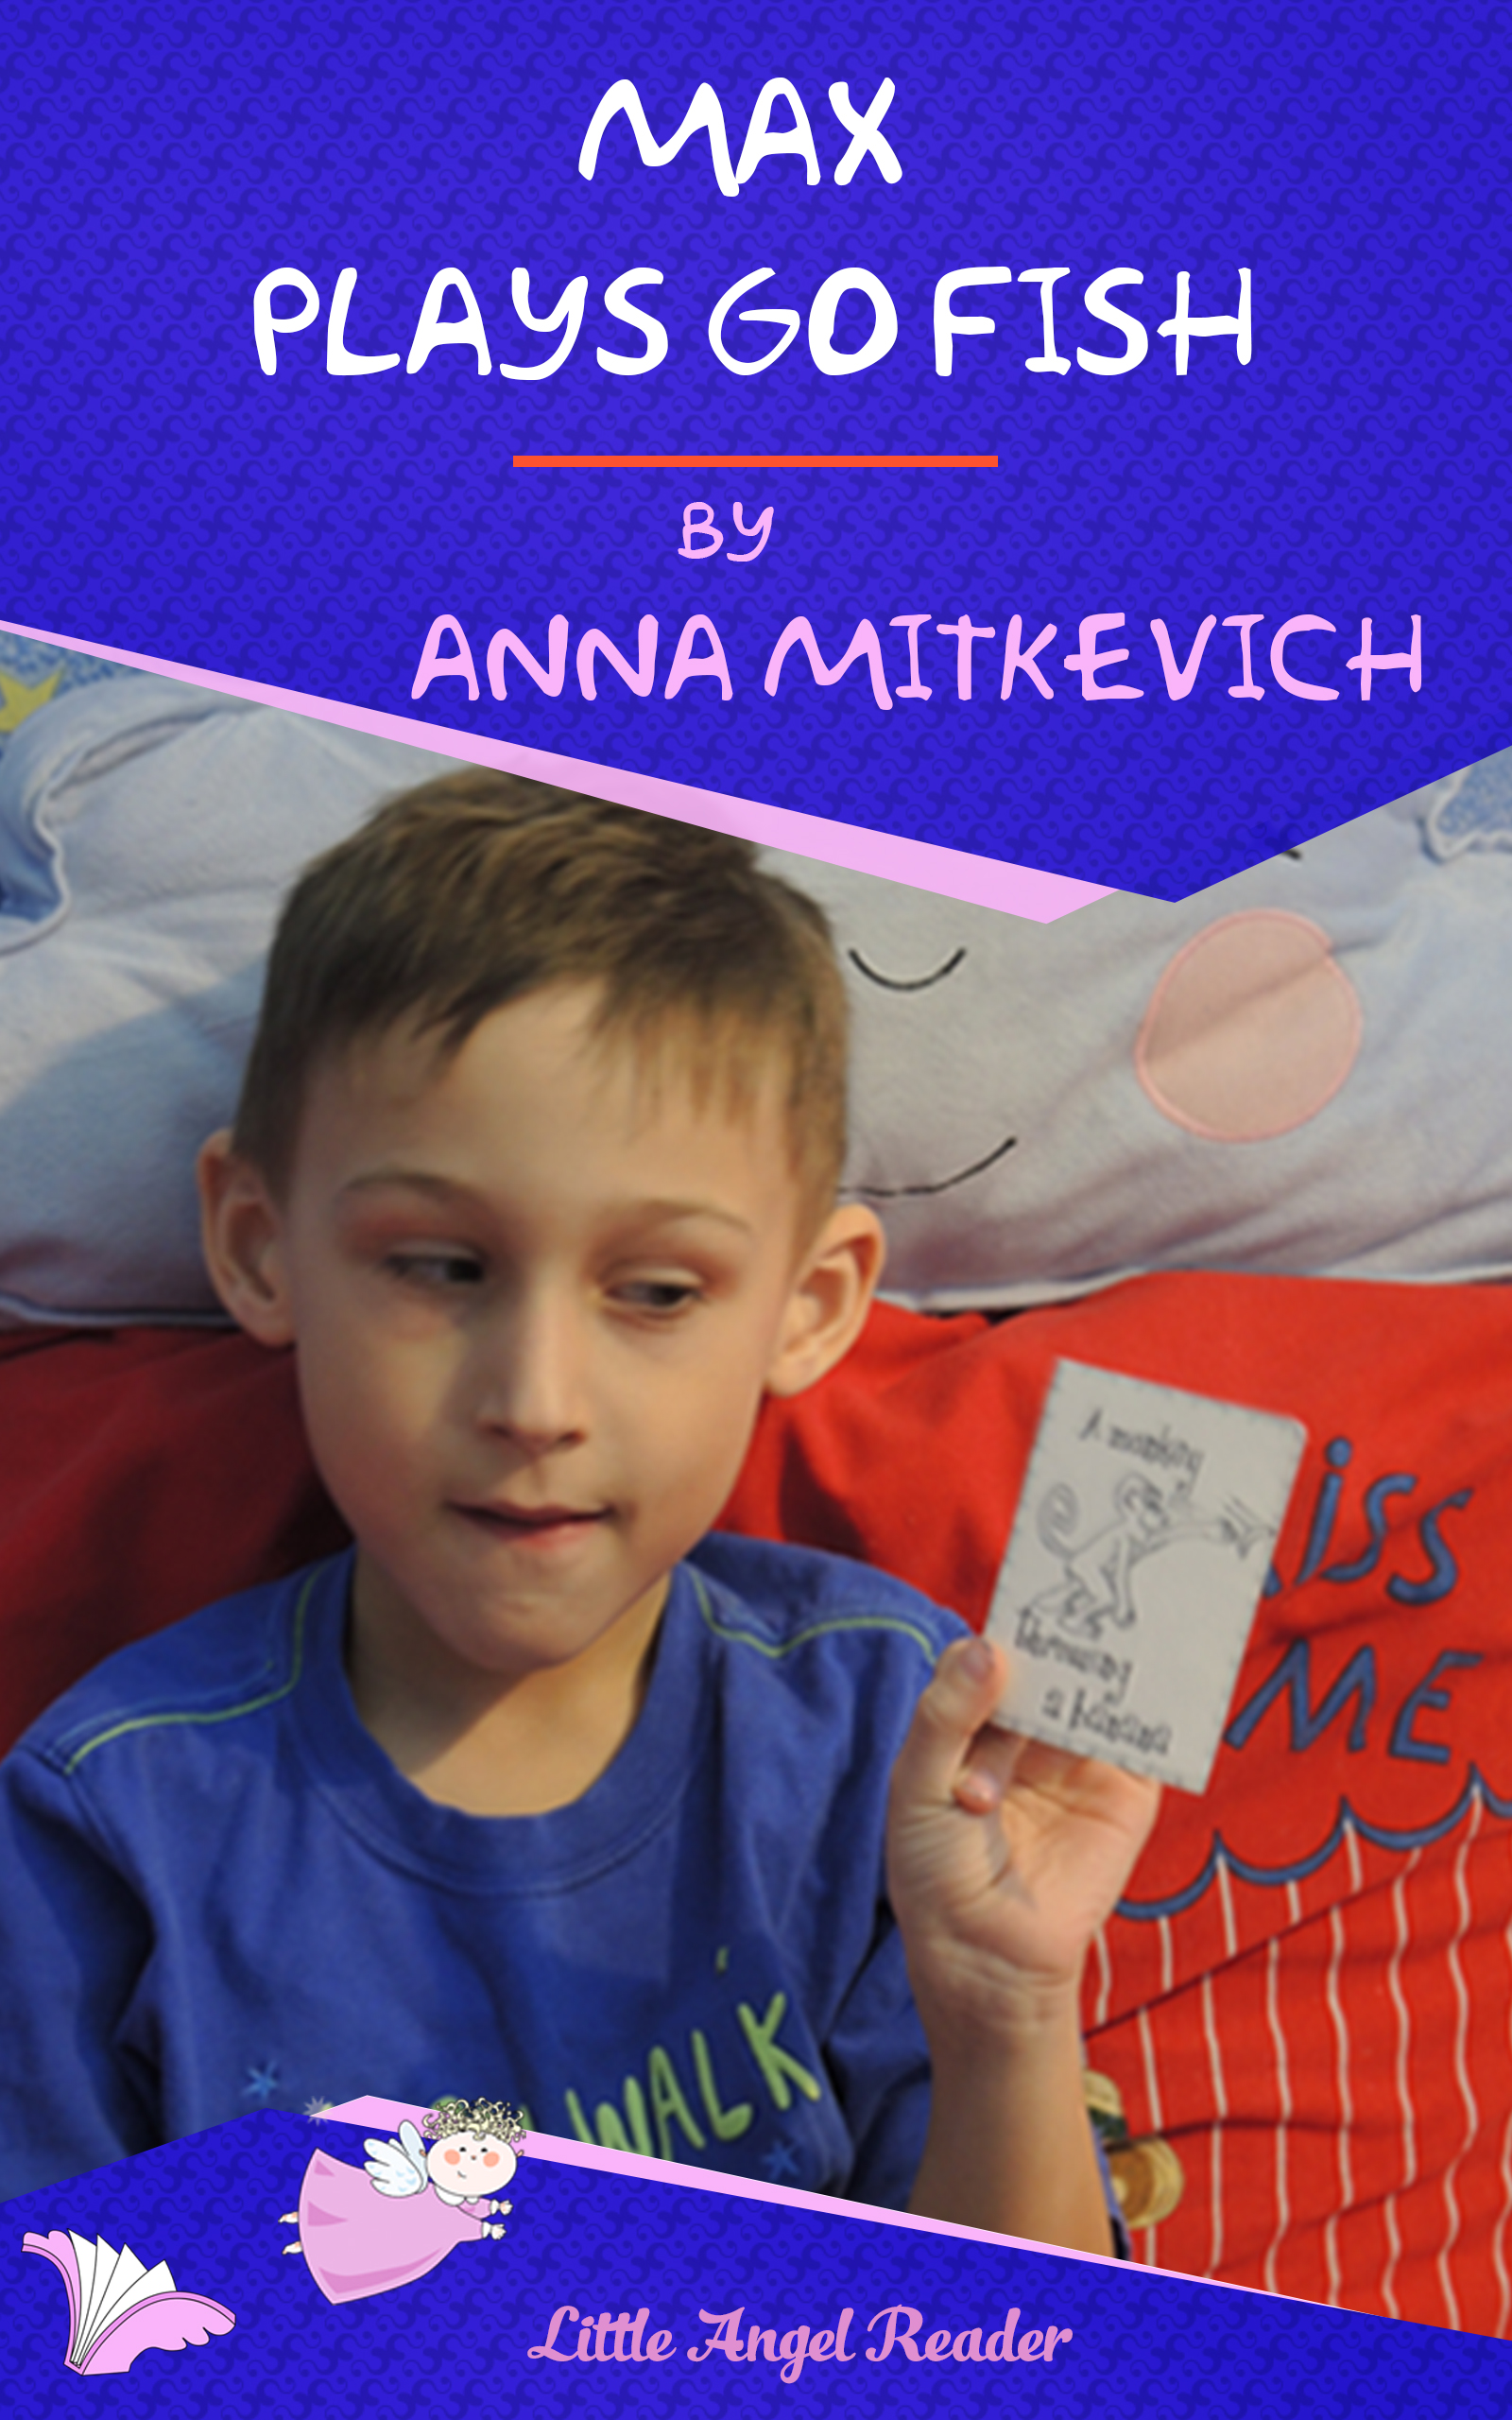 FREE: Max Plays Go Fish by Anna Mitkevich